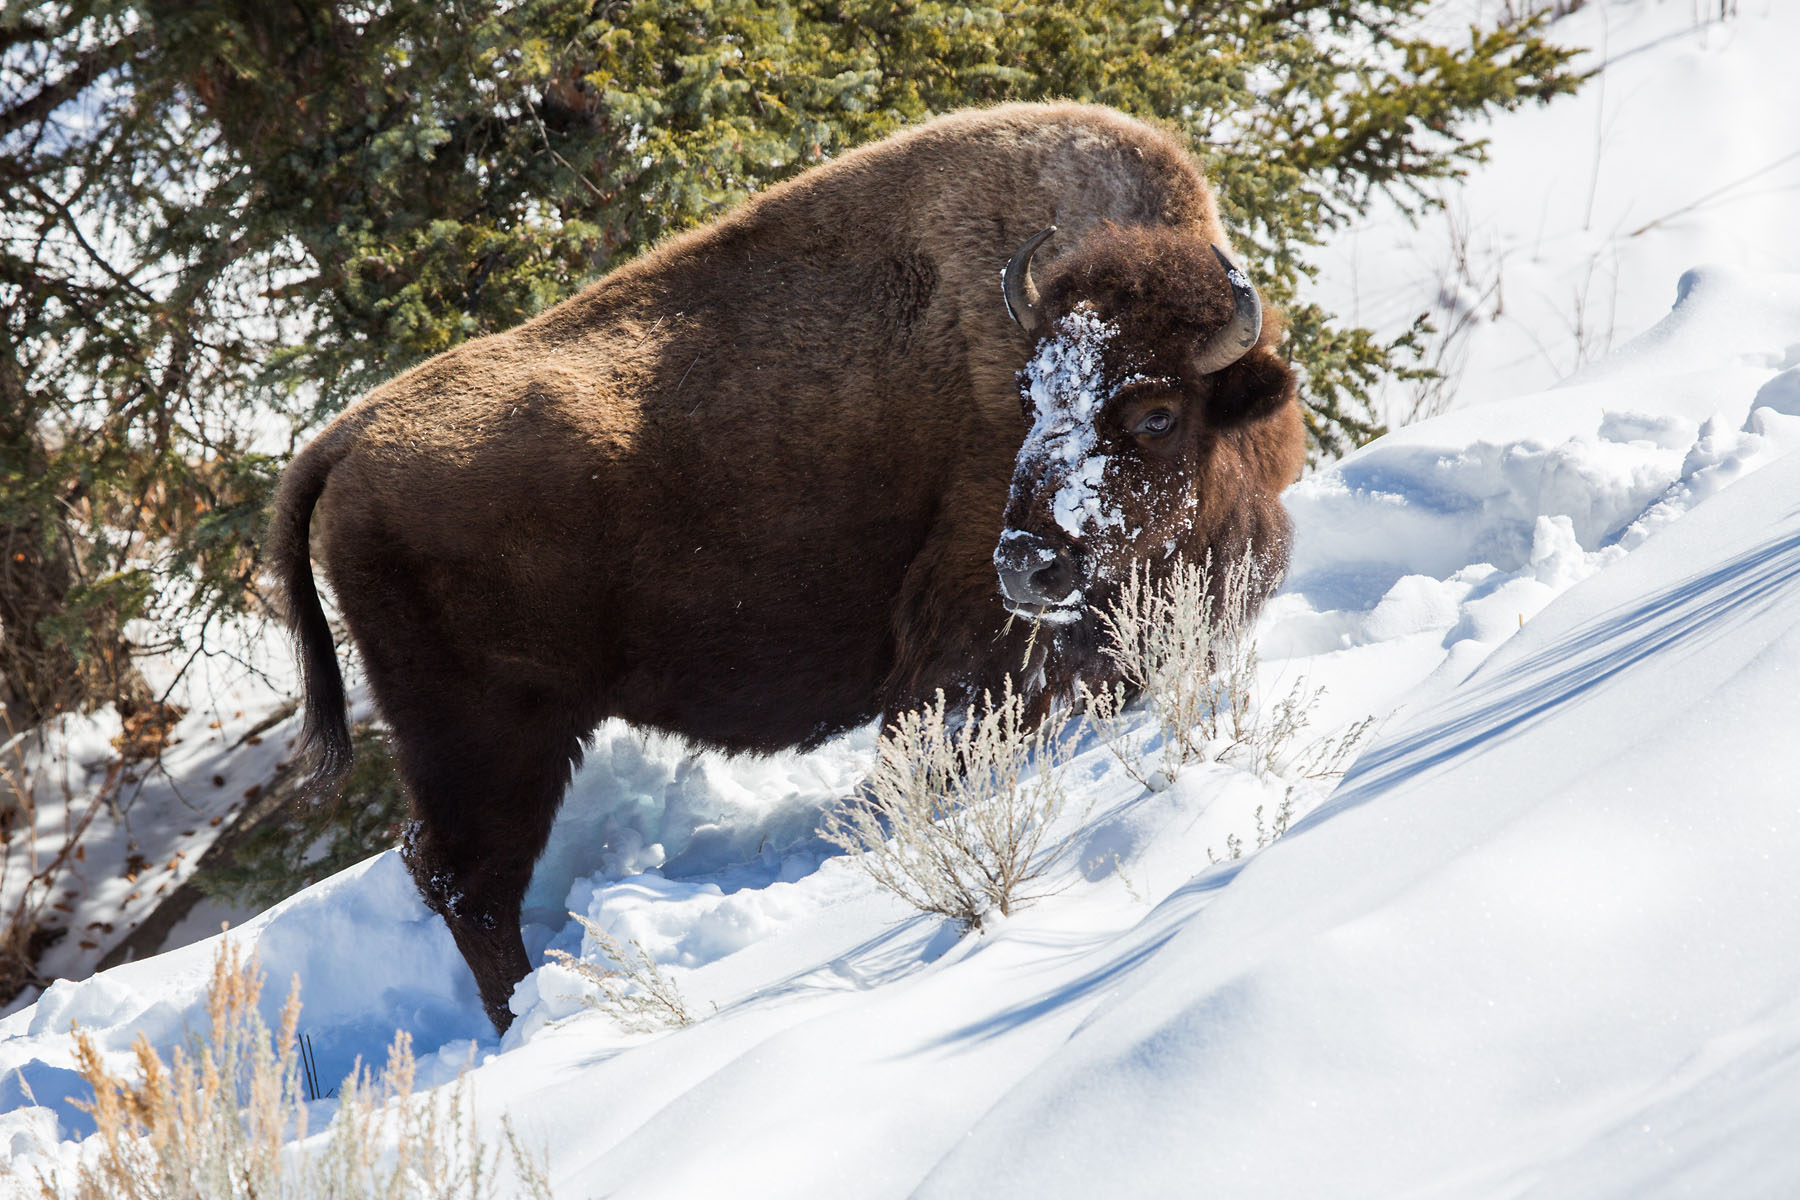 I dont have an image for Feb. 26, so Im substituting this from March 1, 2021, bison, Yellowstone.  Click for next photo.